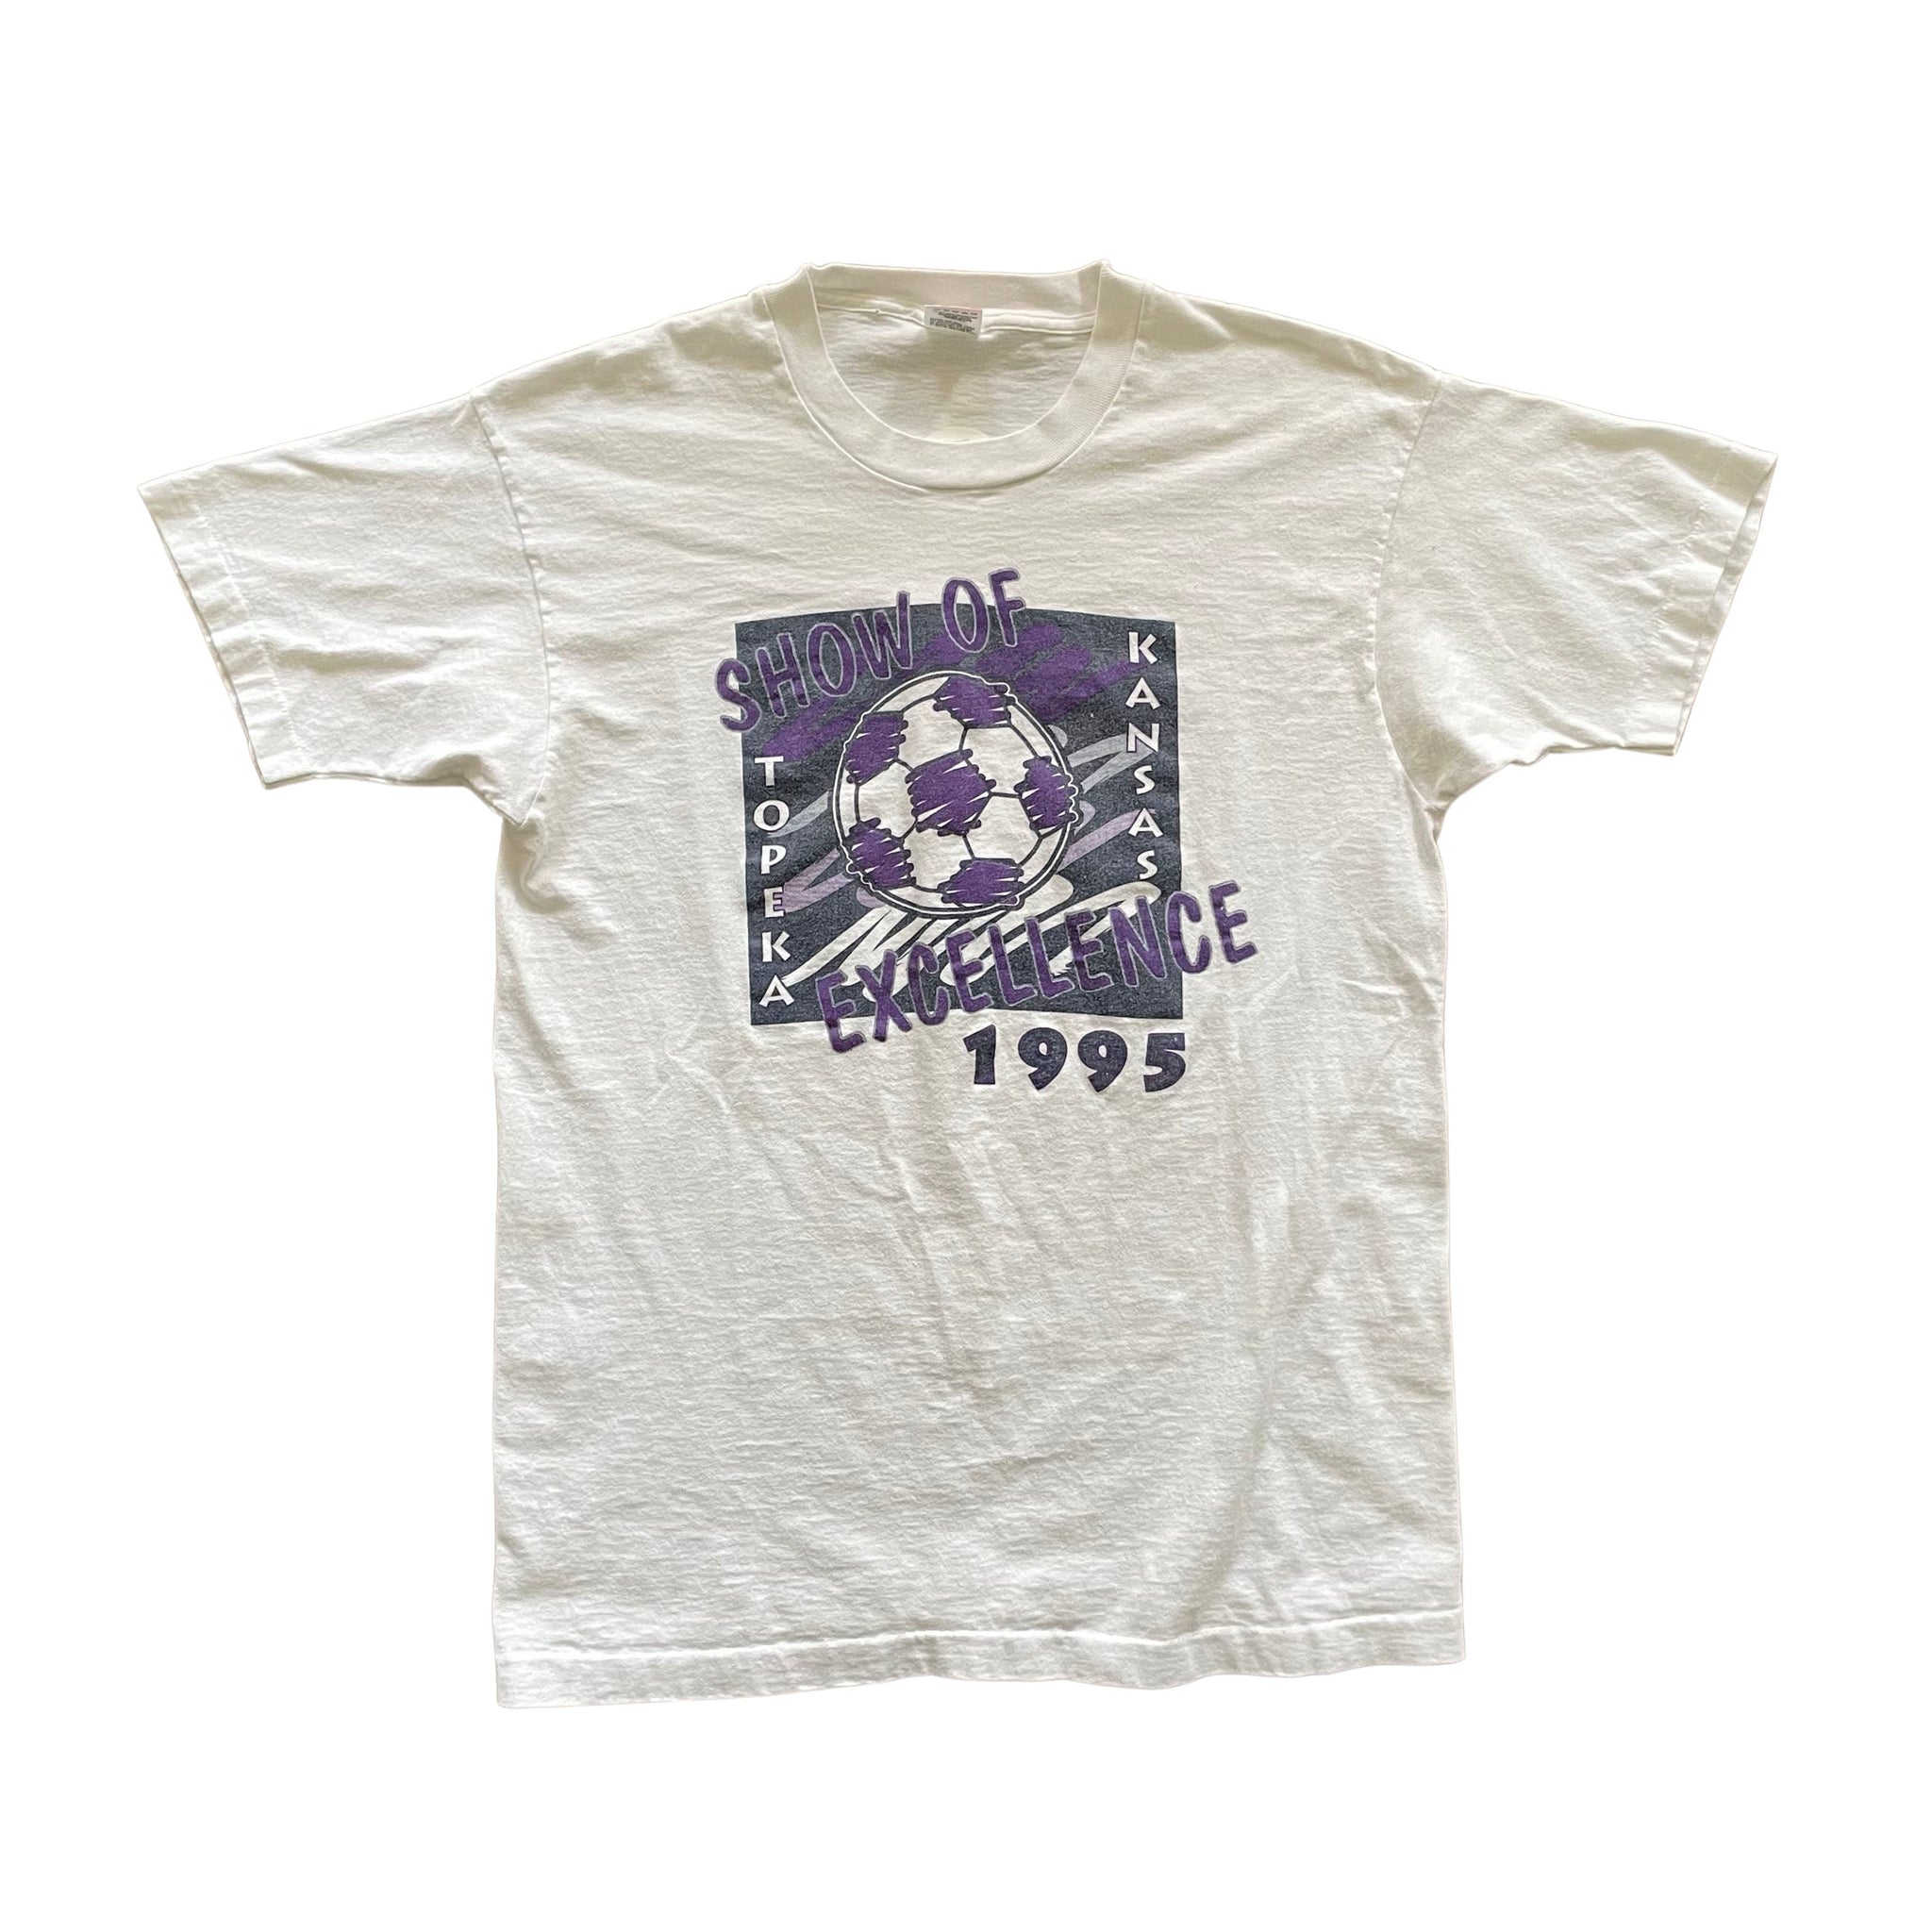 '95 Topeka Show Of Excellence T-Shirt - M